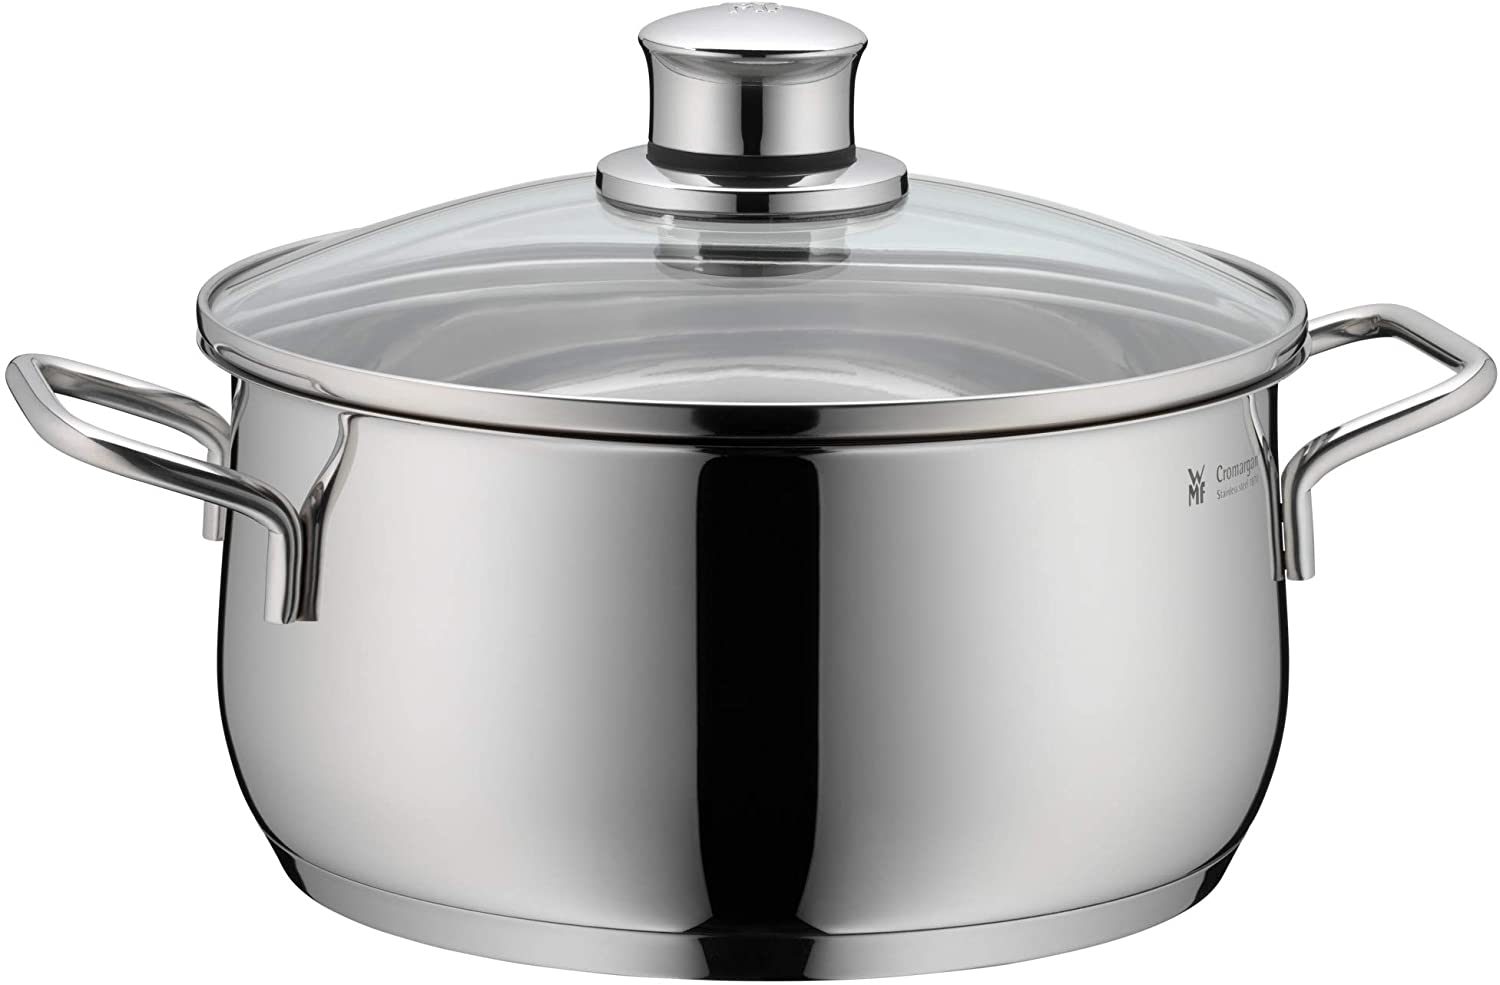 WMF Diadem Plus Low Casserole with Lid, 18/10 Stainless Steel, 20 cm